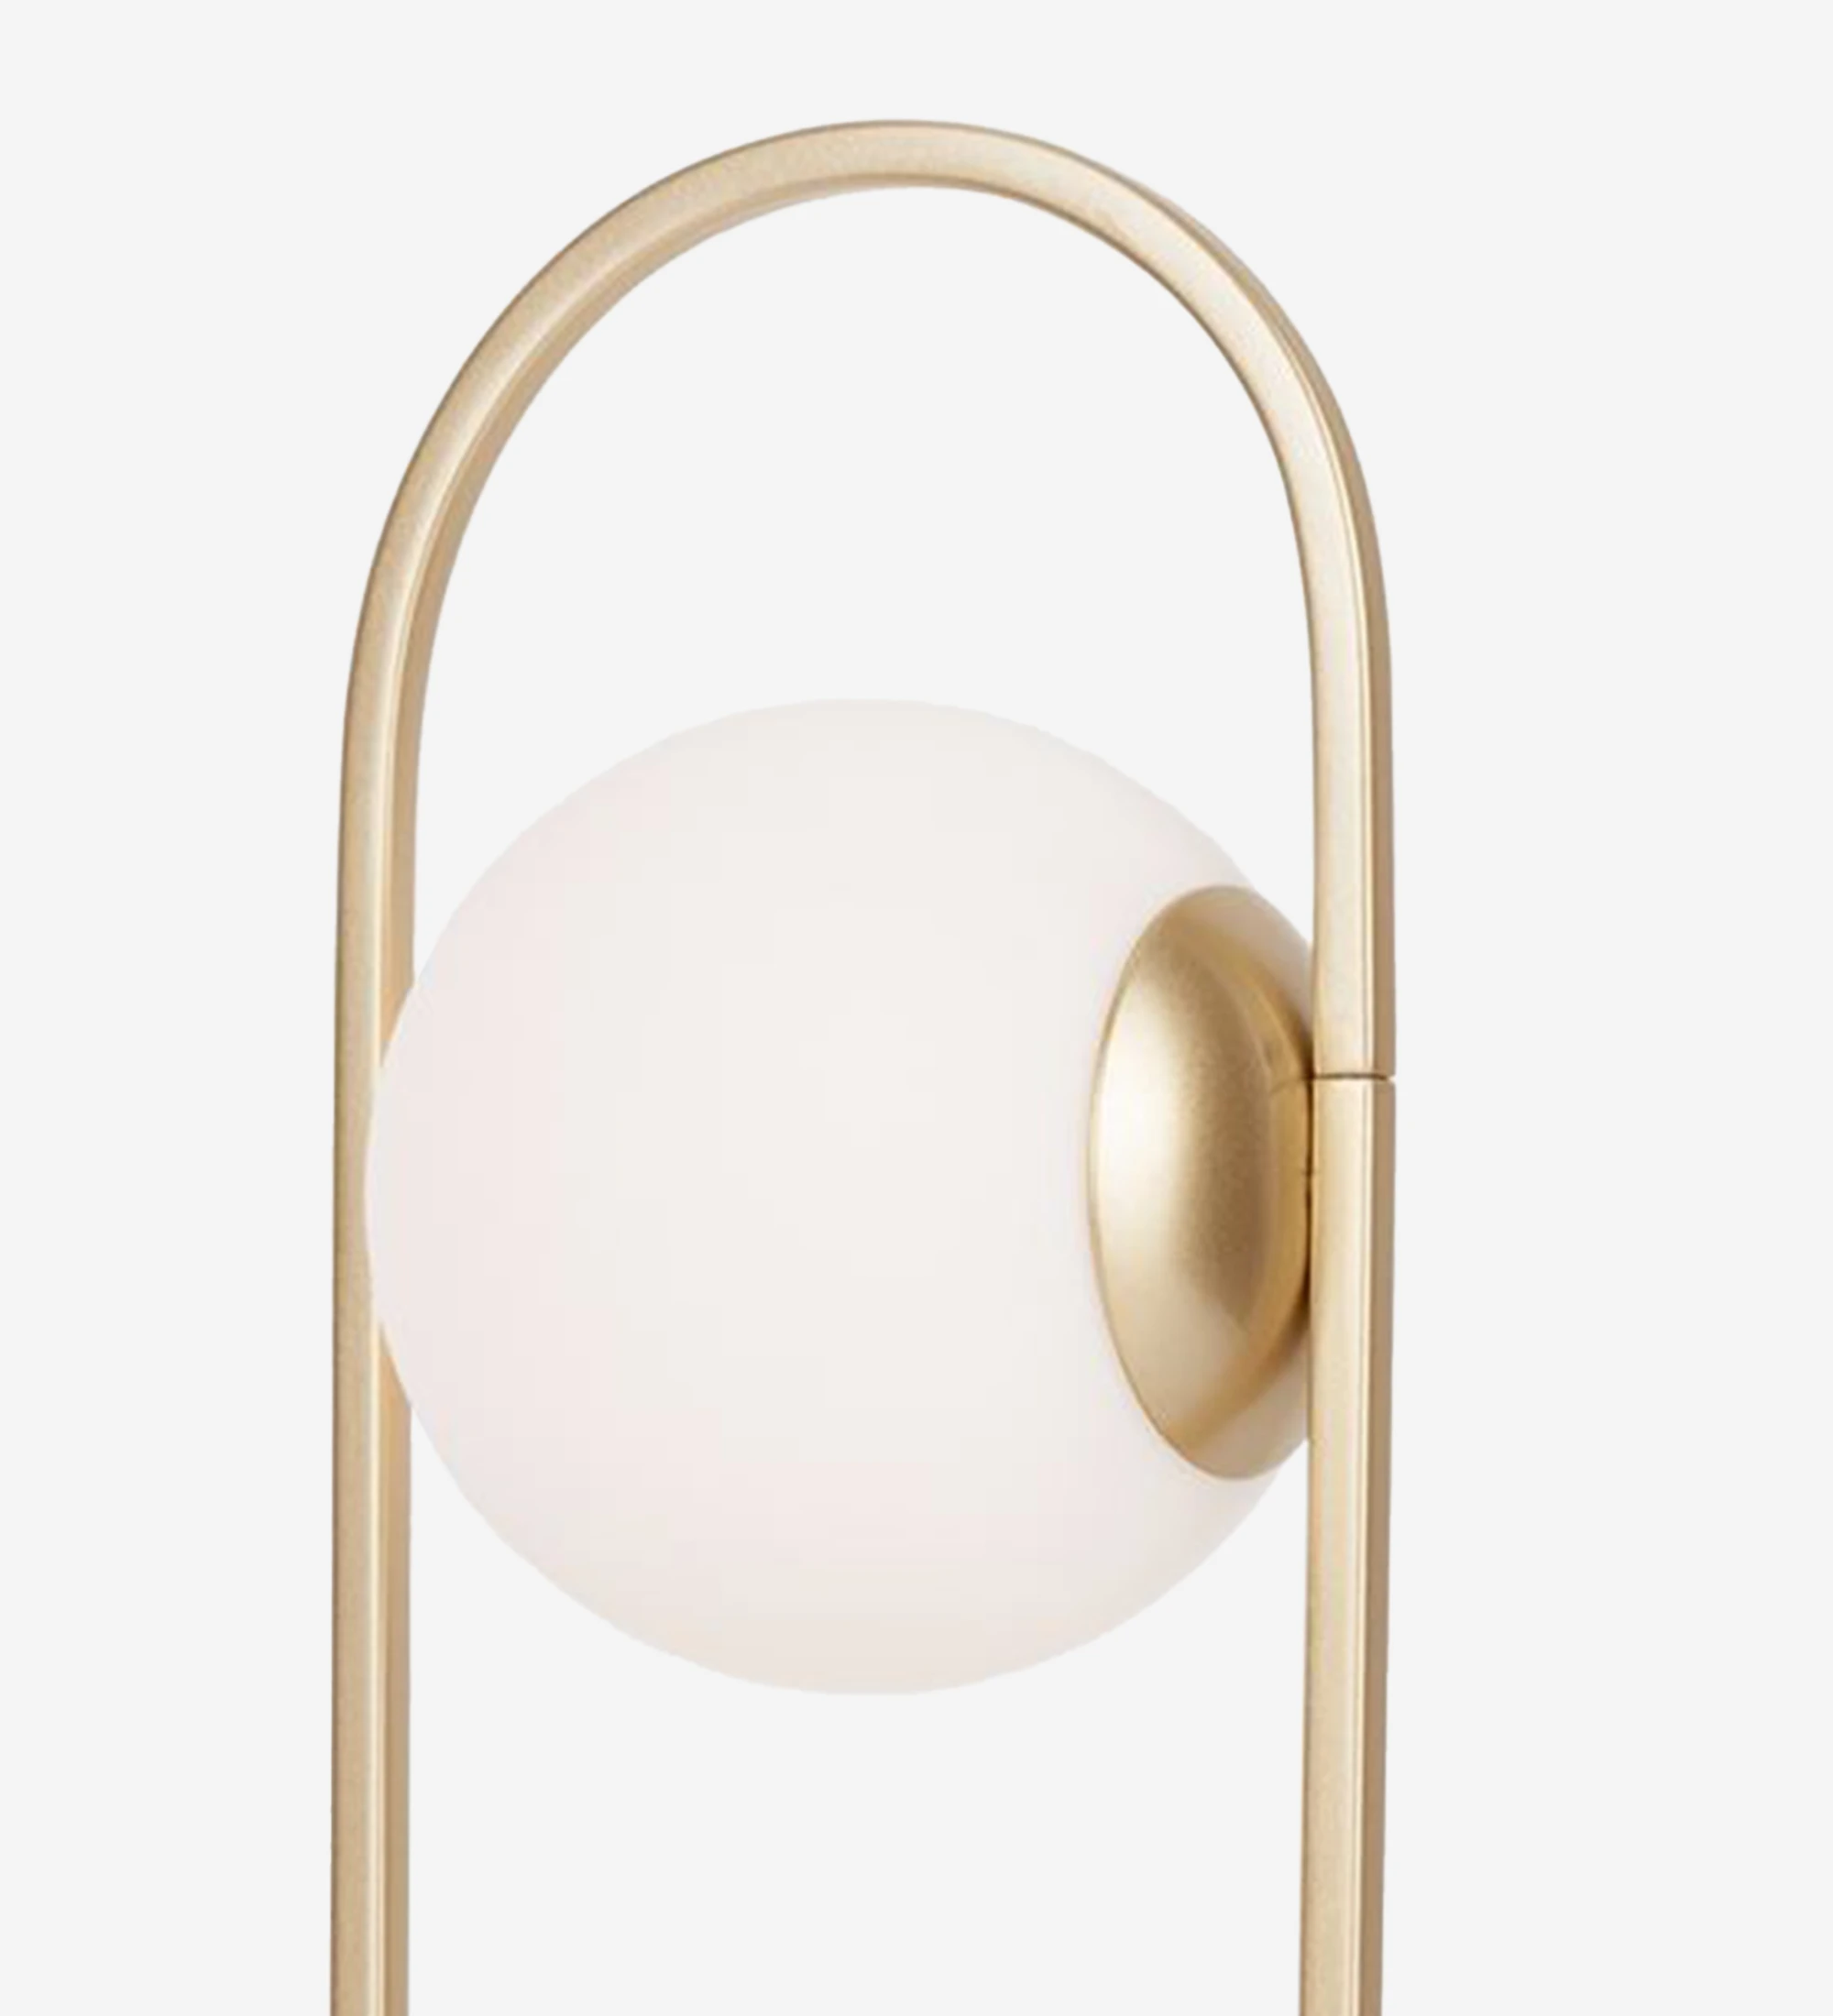 Table lamp in golden metal with opal glass diffuser.